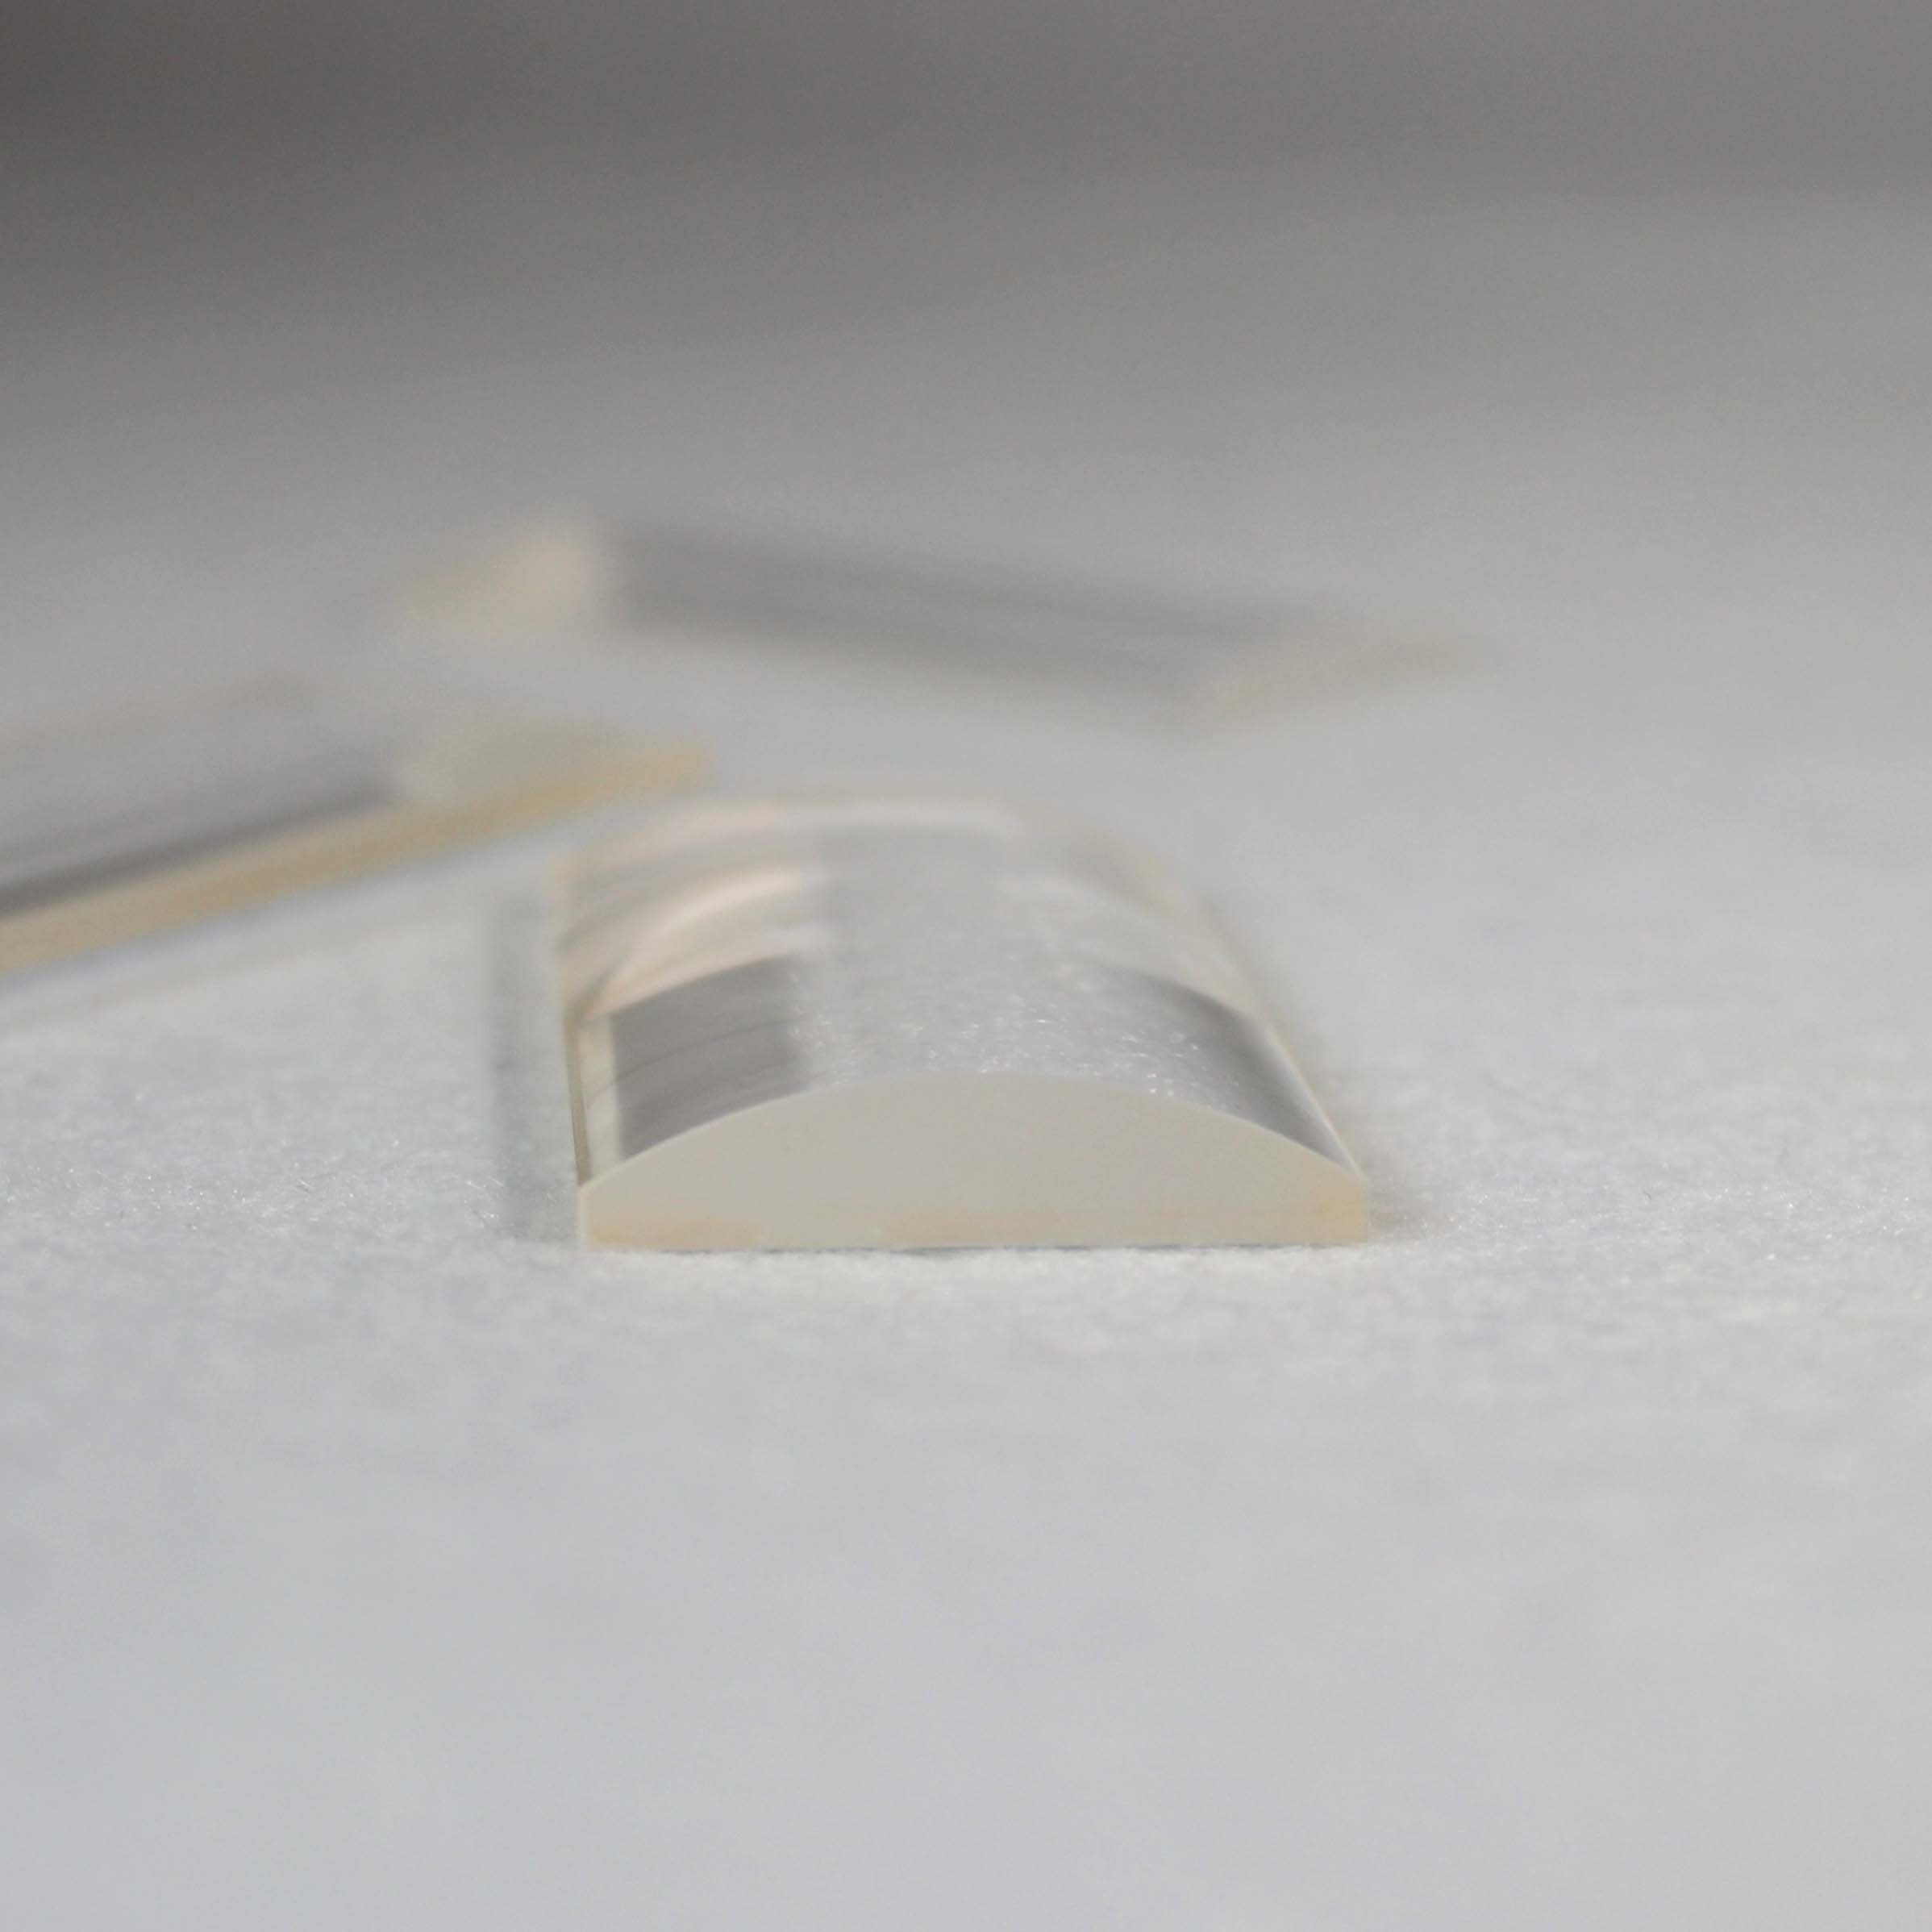 China Supplier Wholesale Glass Fused Silica Square Optical Plano-Convex Cylindrical Lens